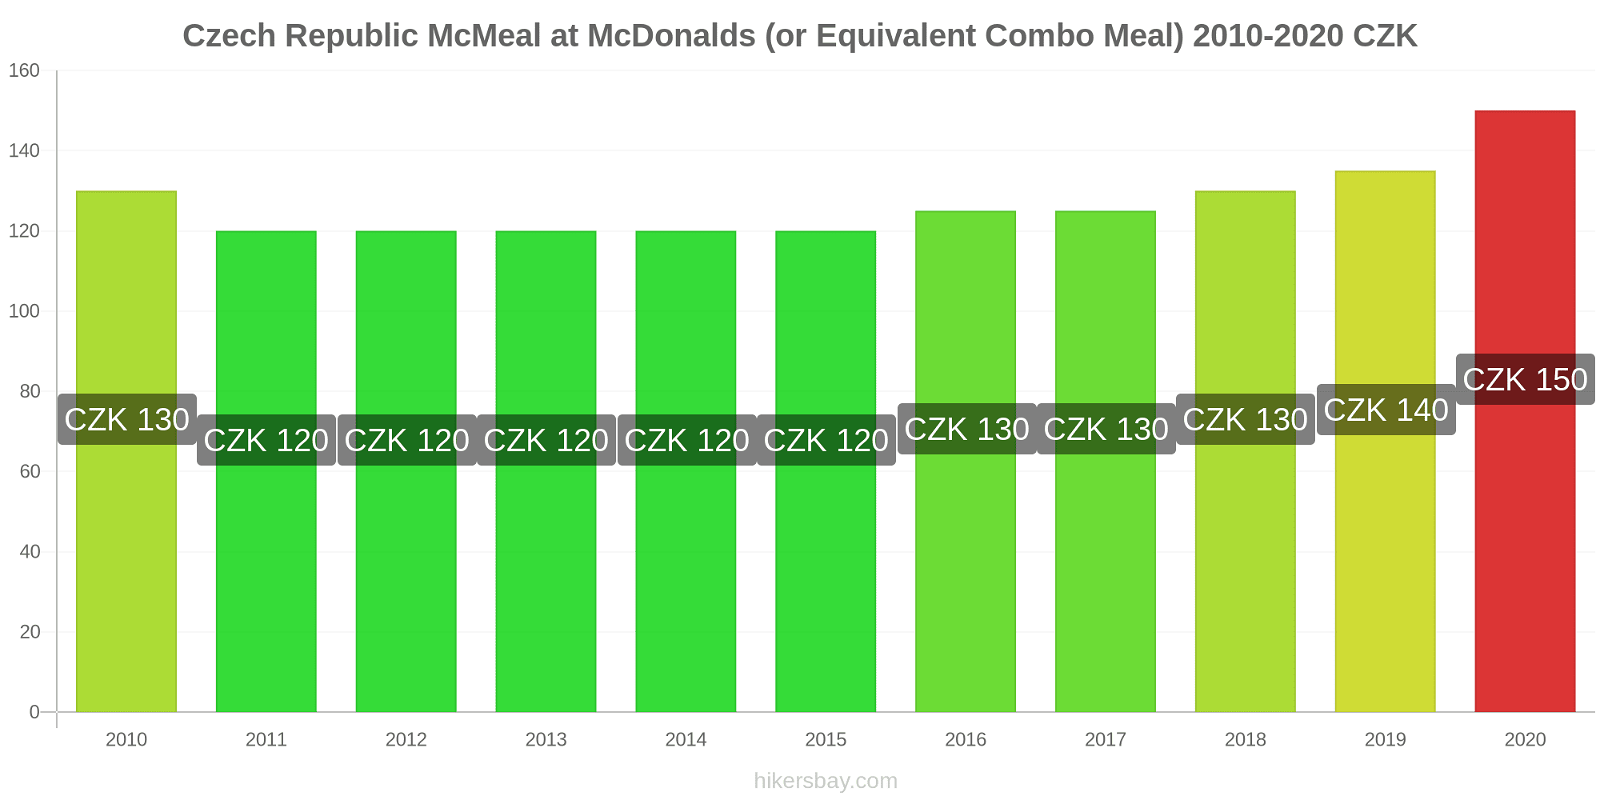 Czech Republic price changes McMeal at McDonalds (or Equivalent Combo Meal) hikersbay.com